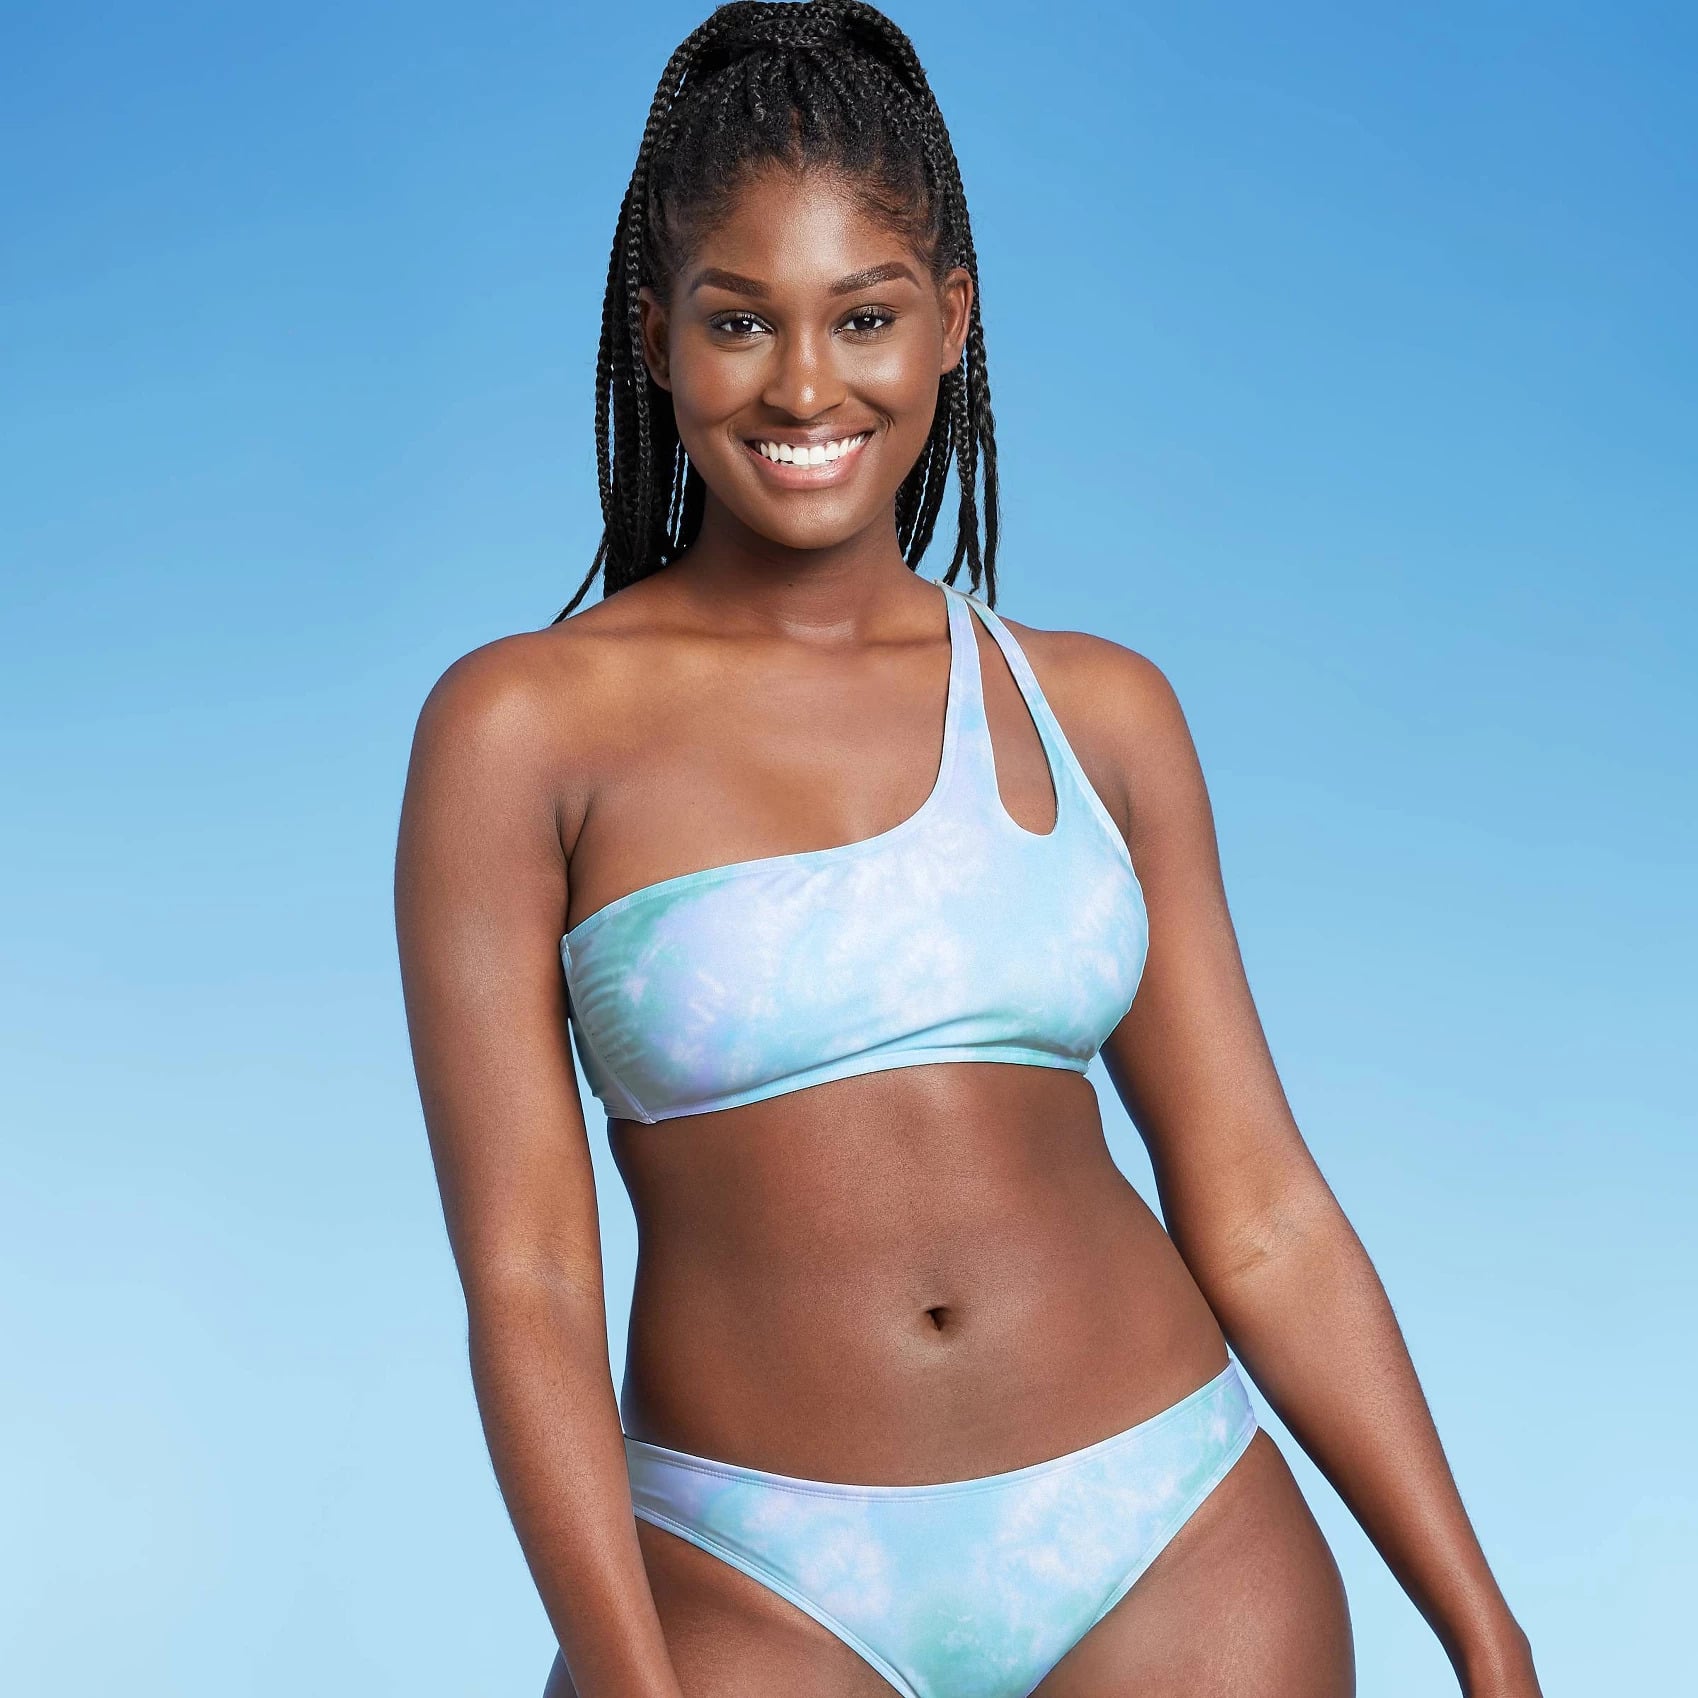 Target Swimsuits: Affordable Bathing Suits and Bikinis for Summer